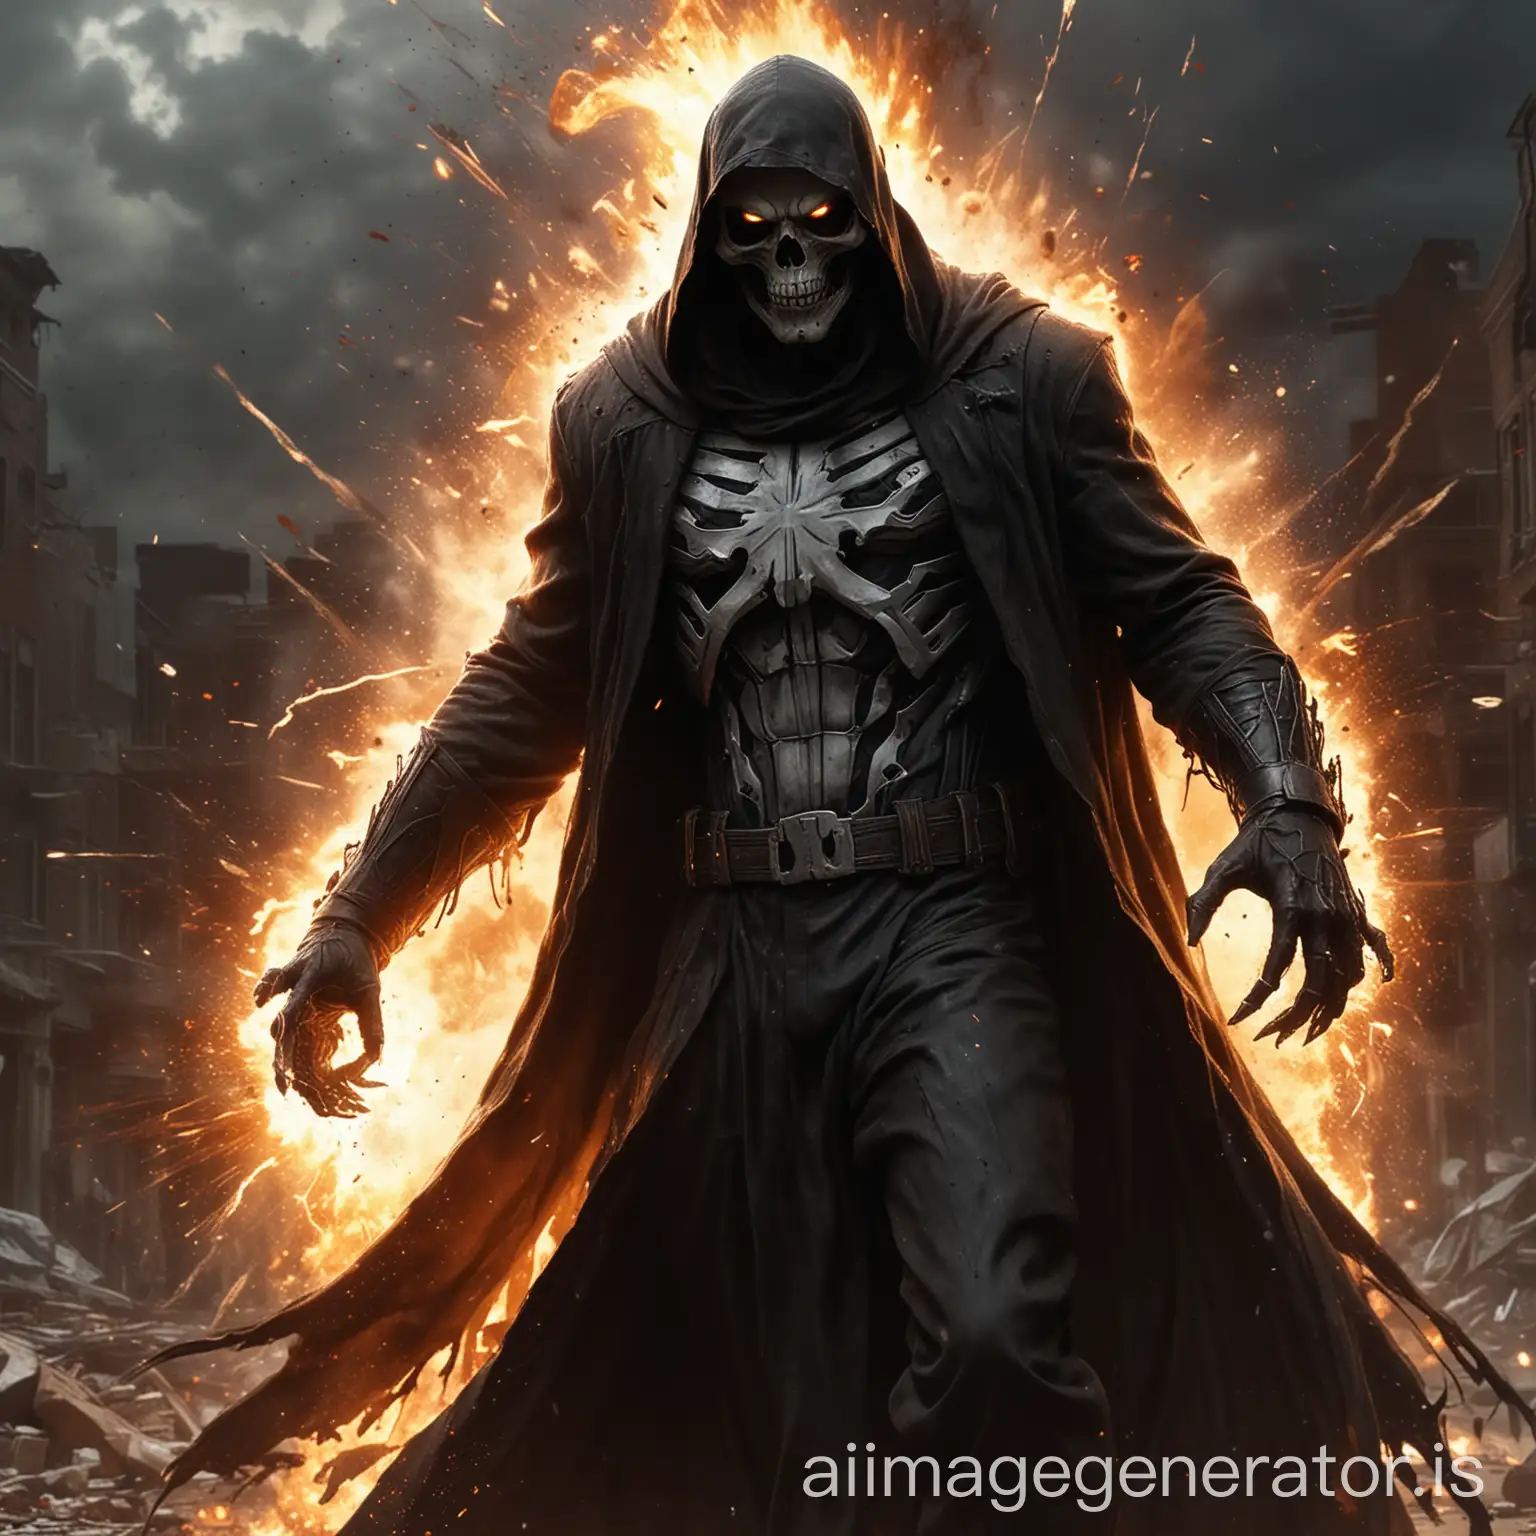 Marvel-Grim-Reaper-with-Explosive-Background-Realistic-Cinematic-Art